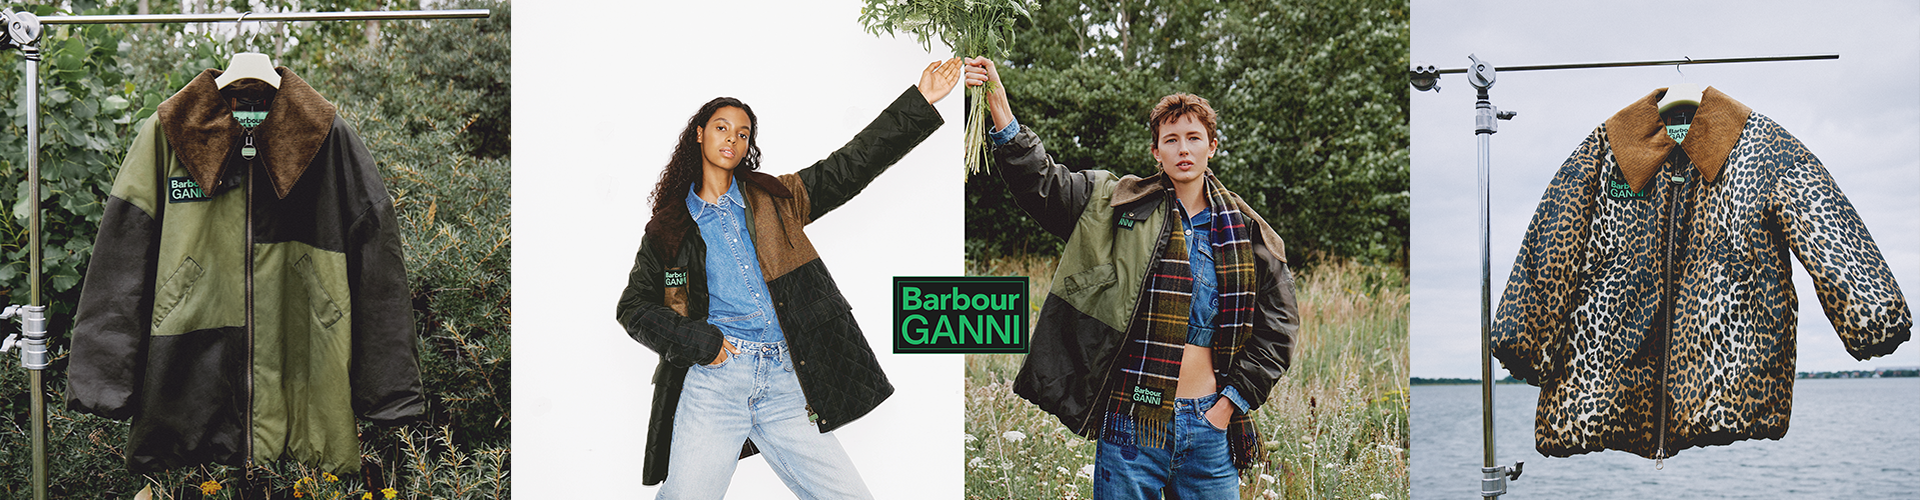 Meeting of Two Worlds: Barbour x GANNI 